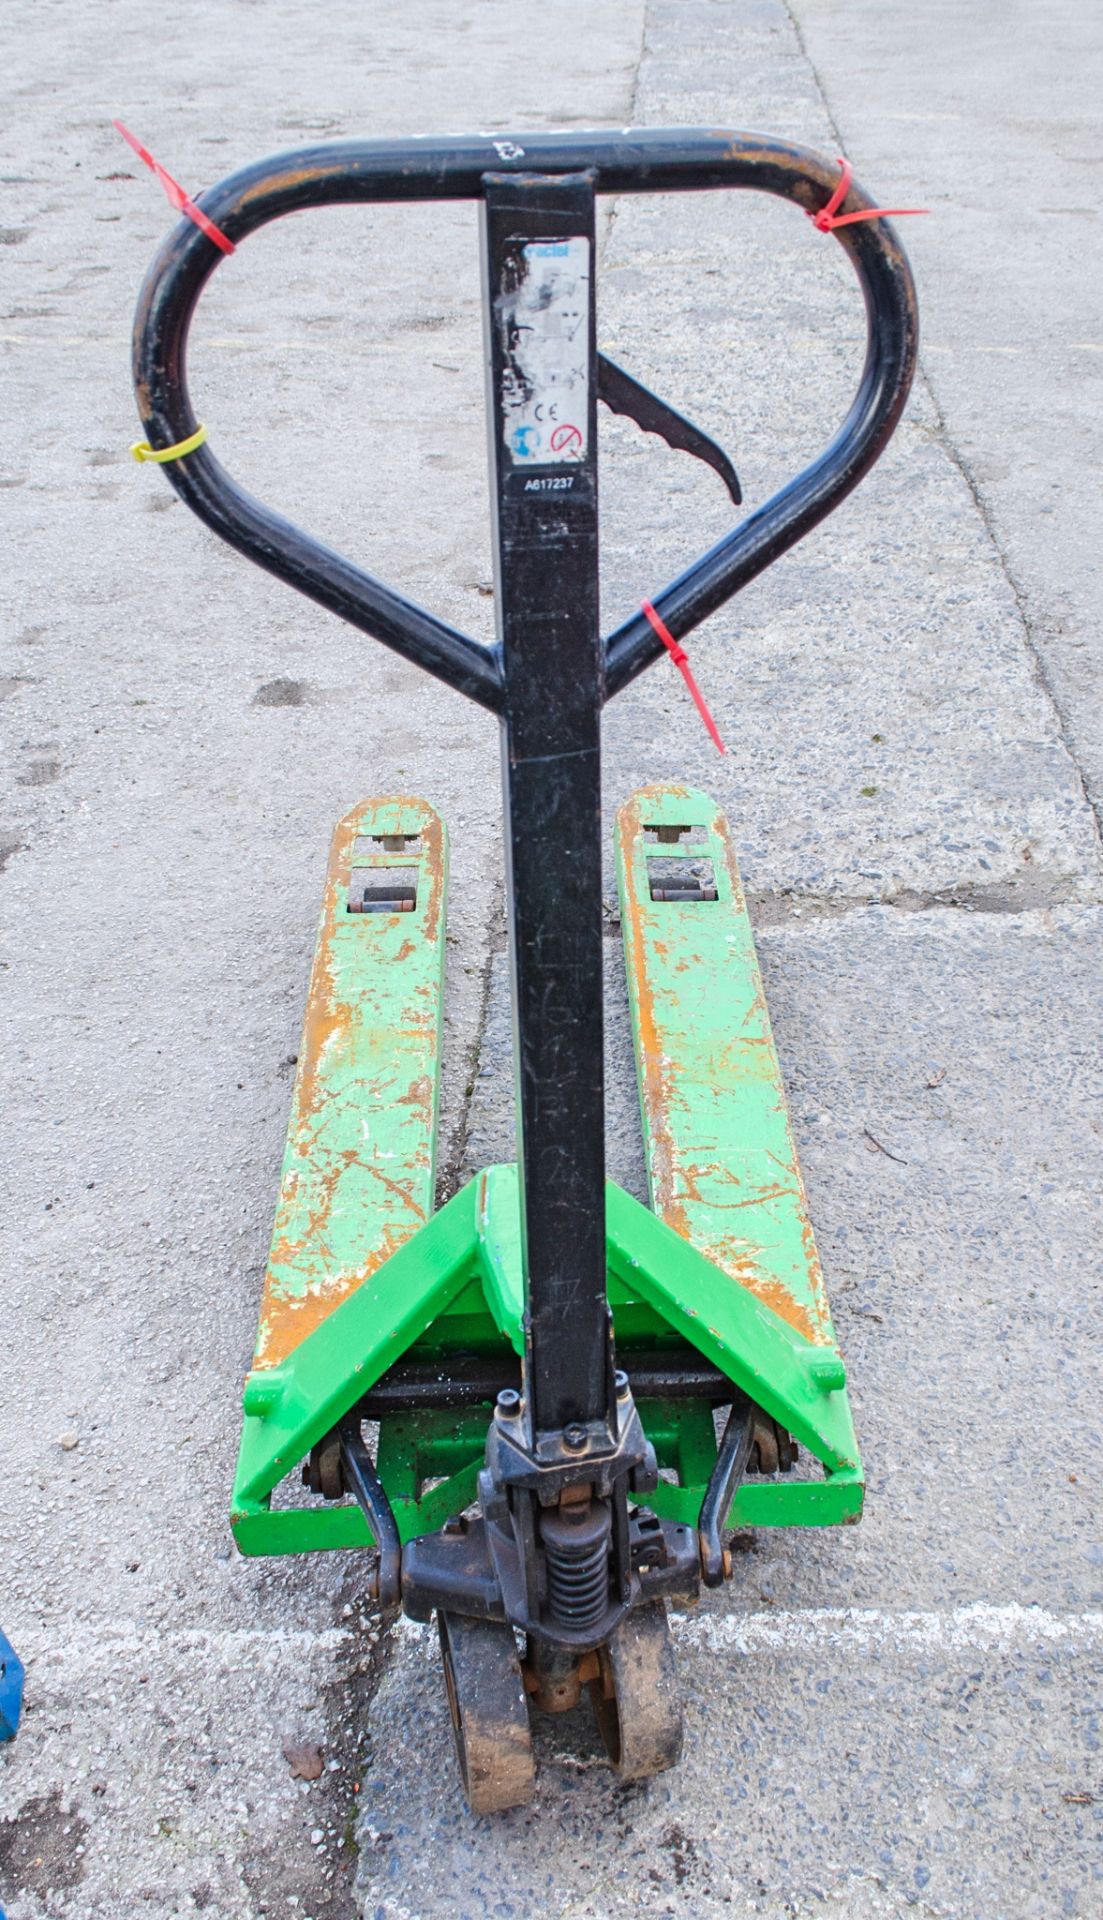 Hand hydraulic pallet truck A1091454 - Image 2 of 2